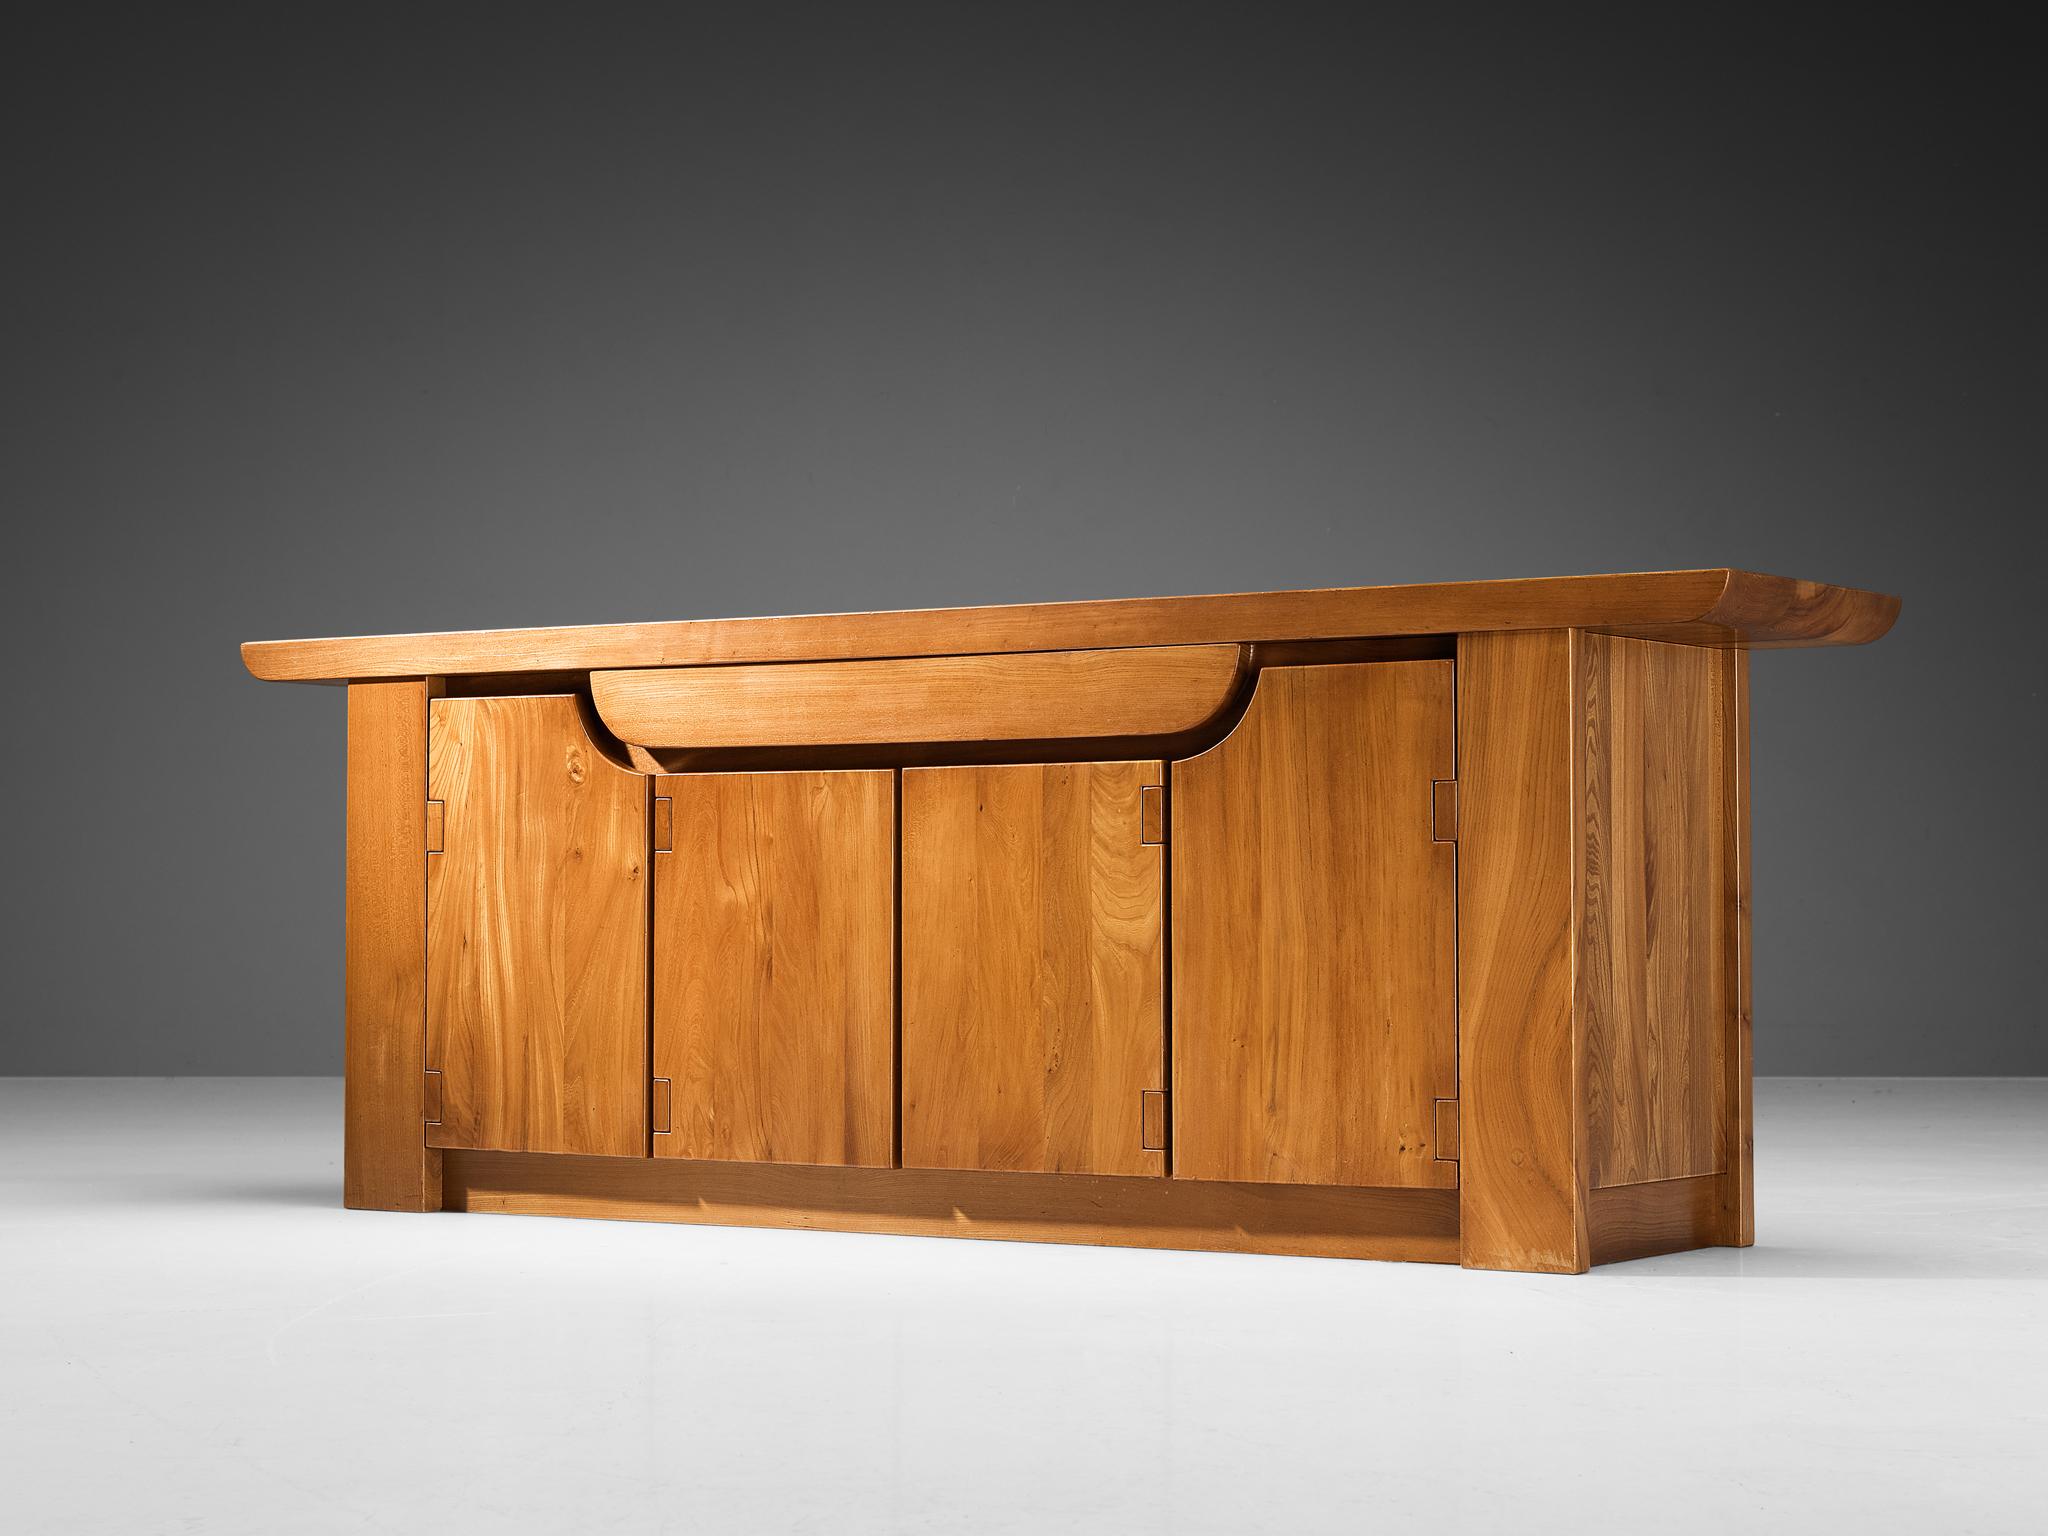 Luigi Gorgoni for Roche Bobois, sideboard, solid elm, France, 1980s

The Italian designer and architect Luigi Gorgoni designed furniture pieces for Roche Bobois since the mid 1970s. Gorgoni is known for its streamlined and clear designs, this piece